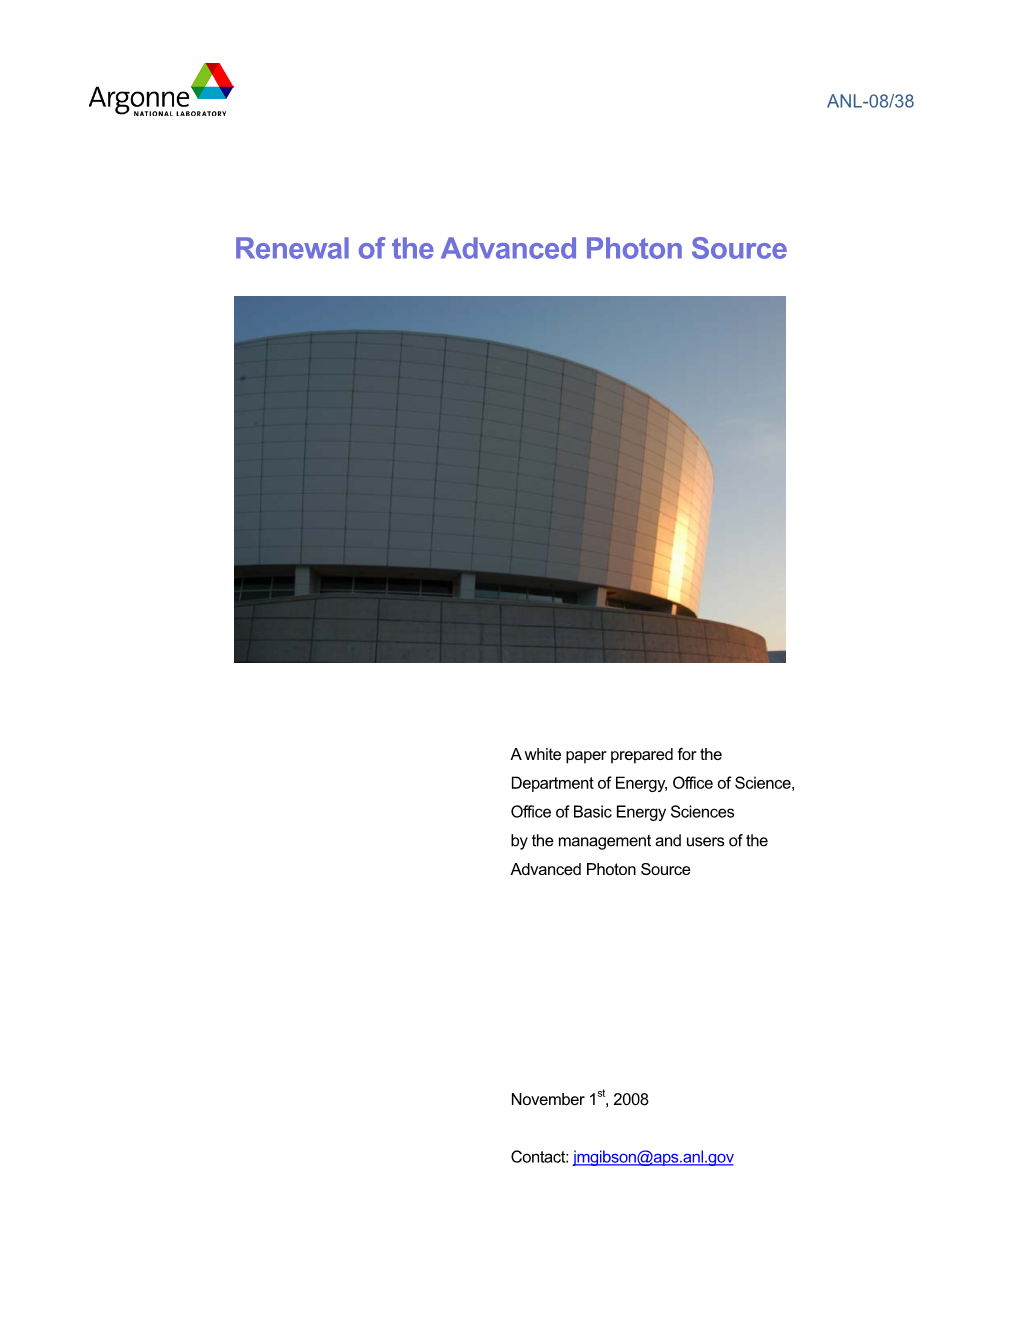 Renewal of the Advanced Photon Source